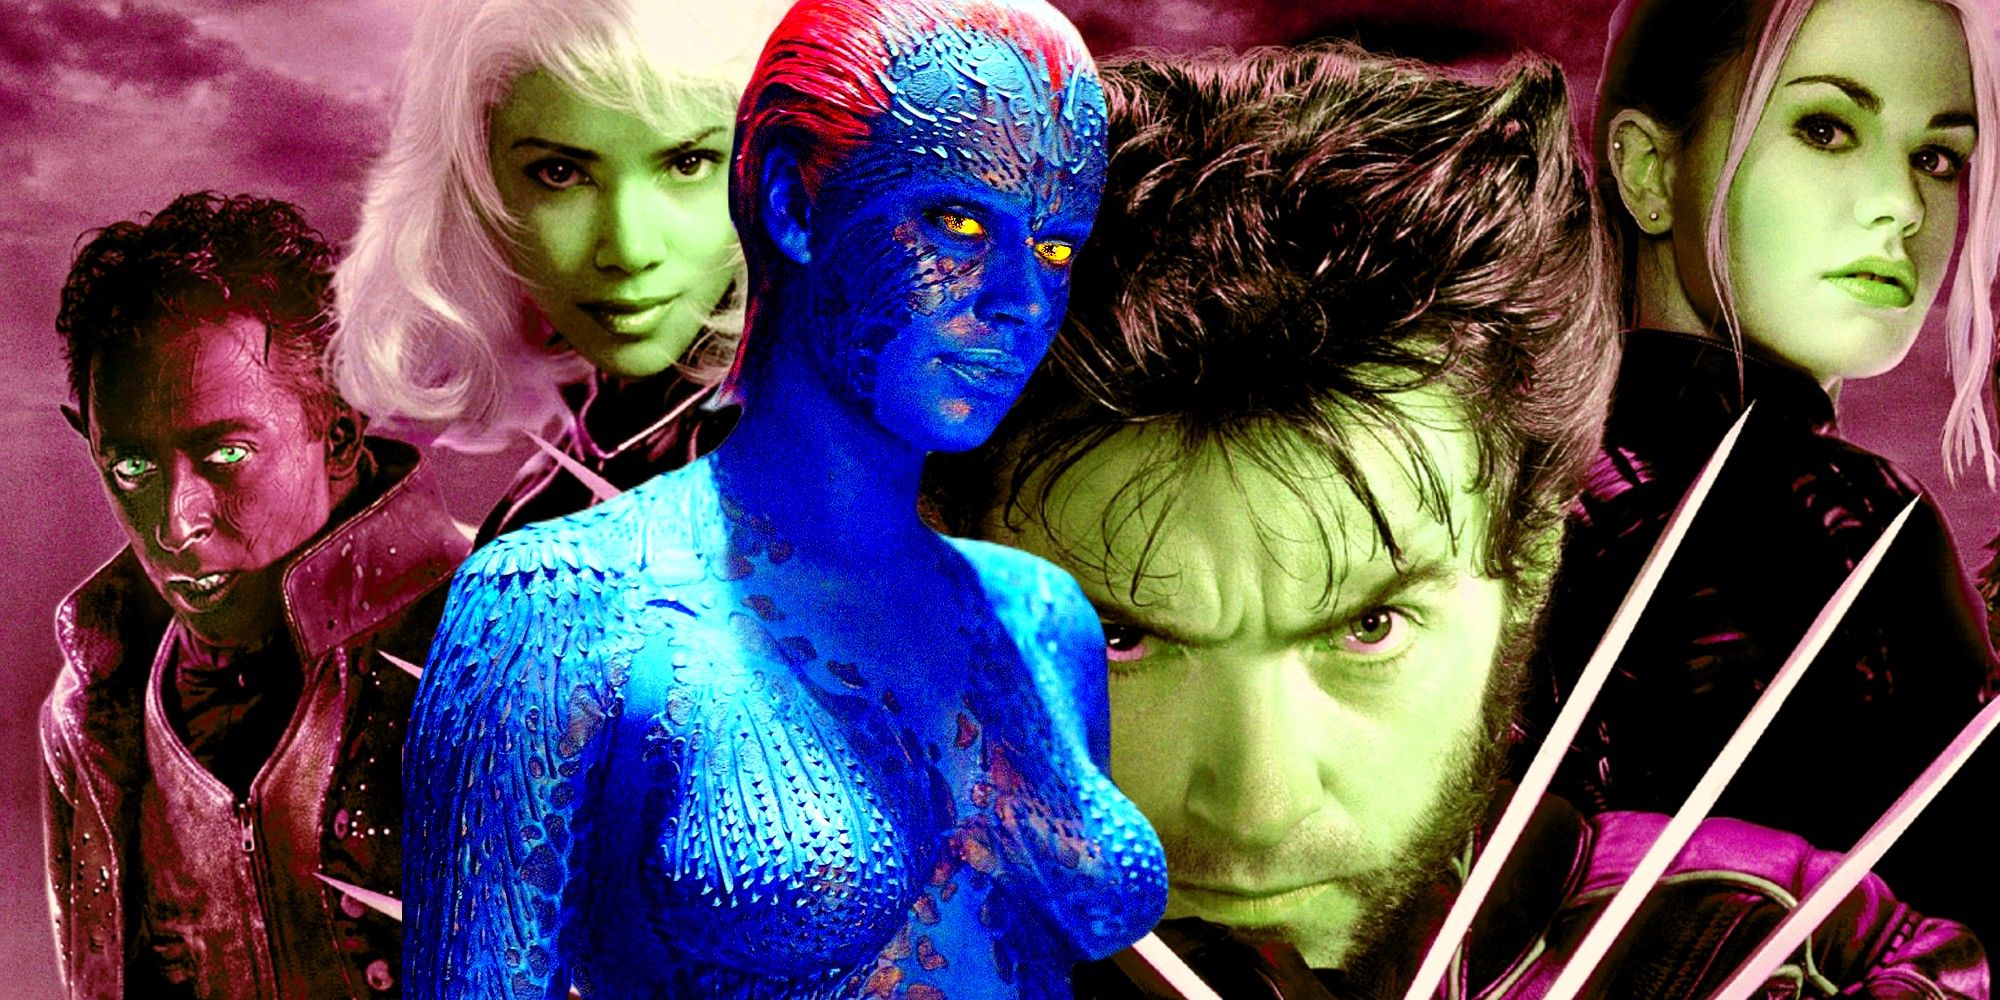 Custom image with rebecca romijn as Mystique in front of the x2 x-men united poster